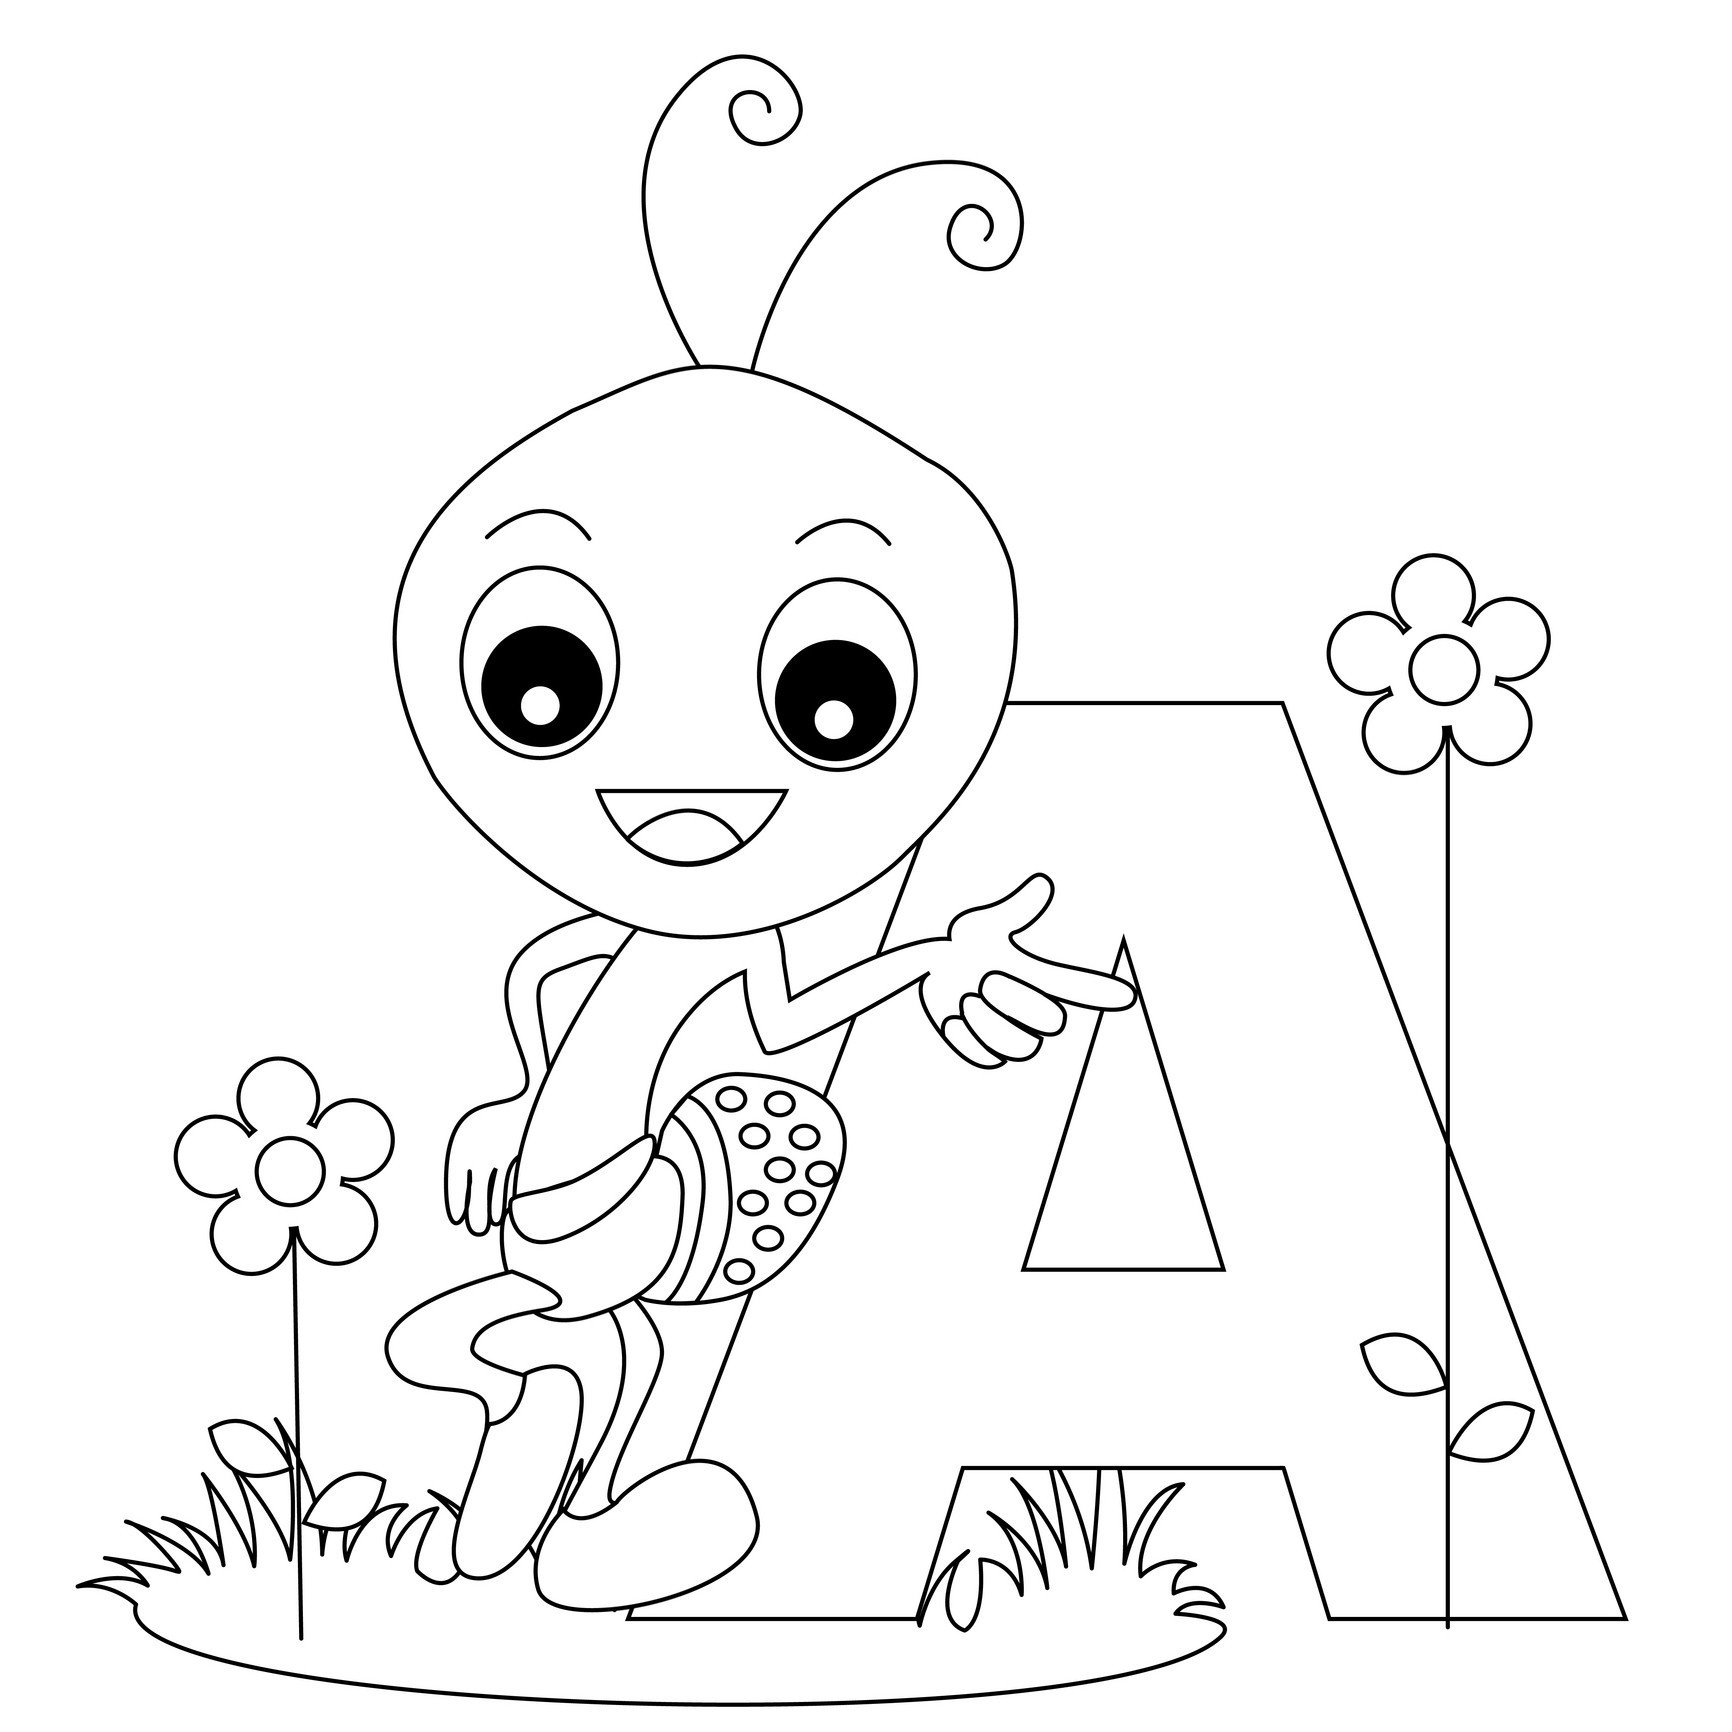 Coloring Pages For Kids Letters
 Free Printable Alphabet Coloring Pages for Kids Best